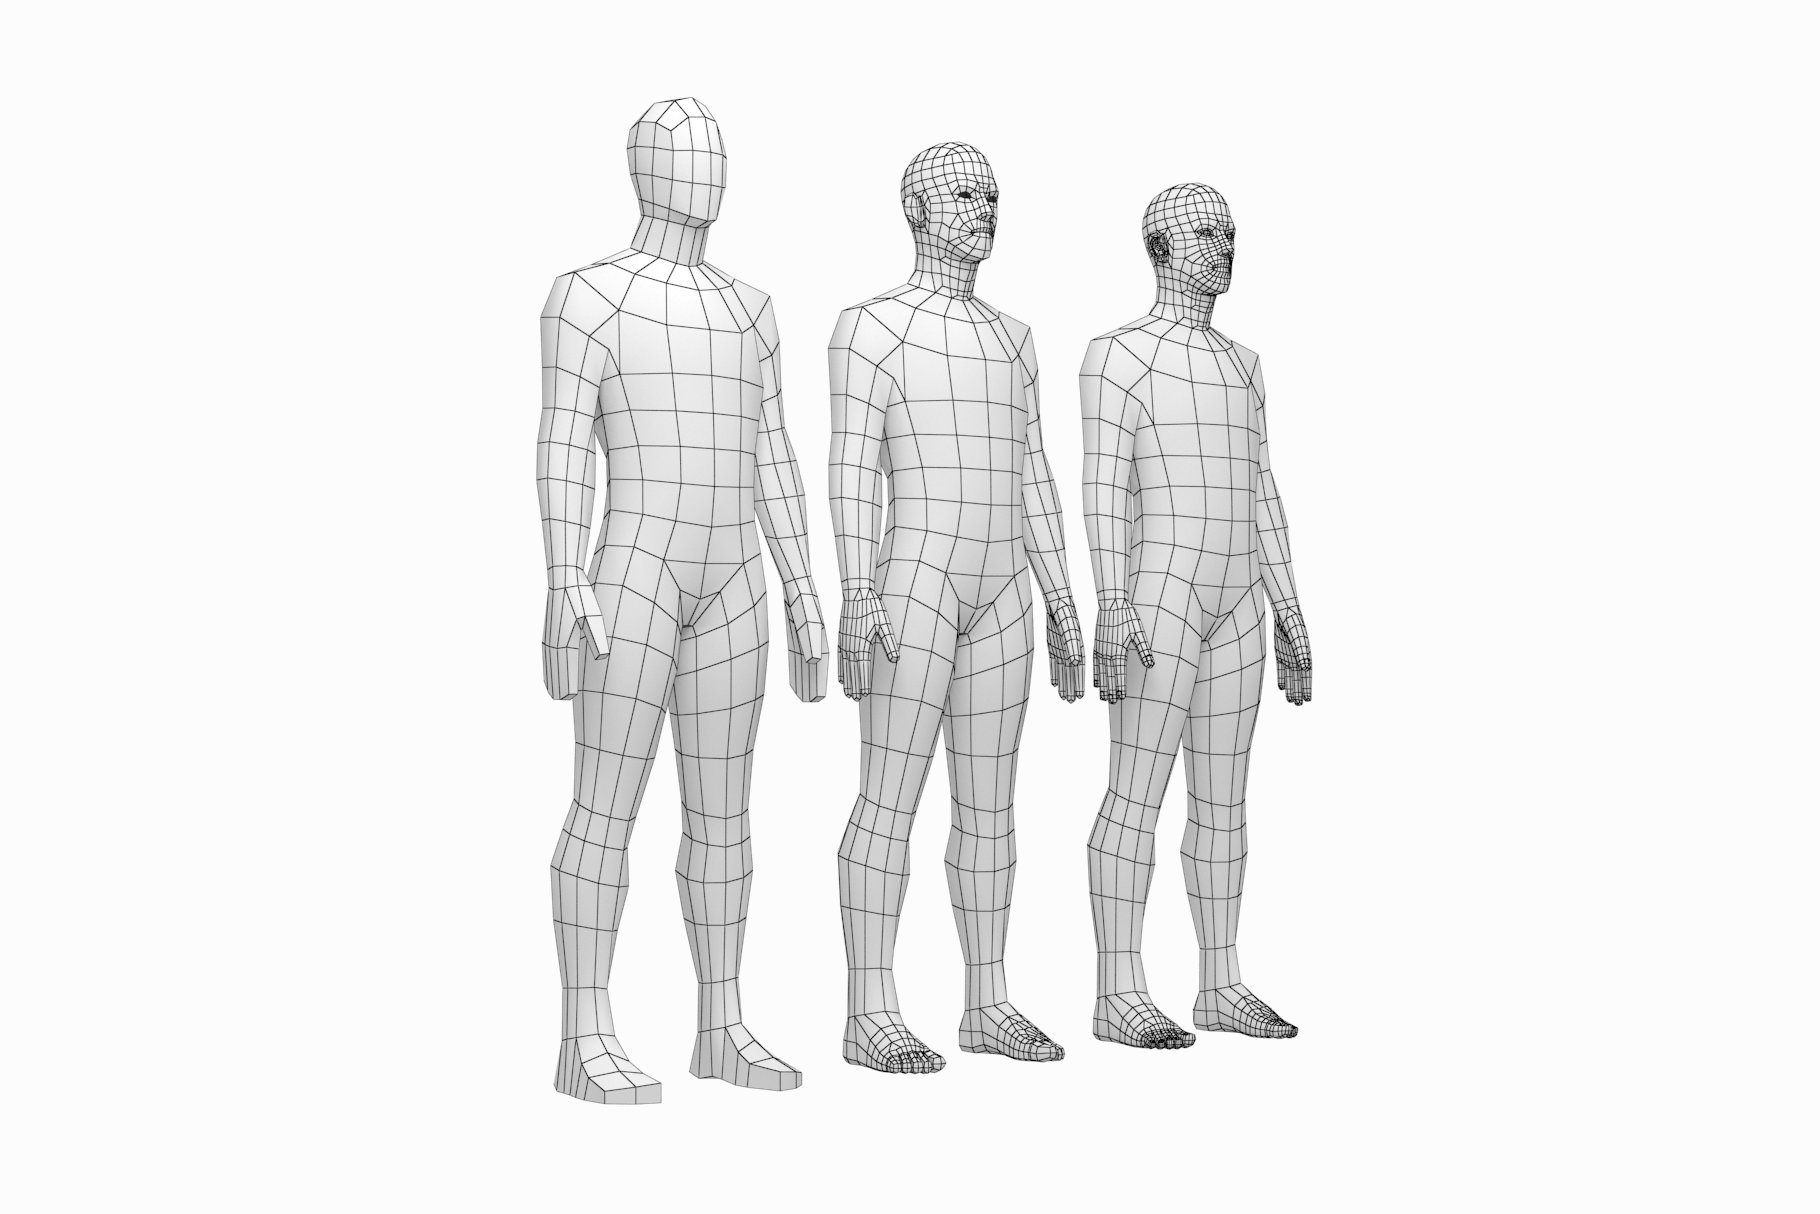 Rendering of an amazing low poly 3d model of a male body without textures